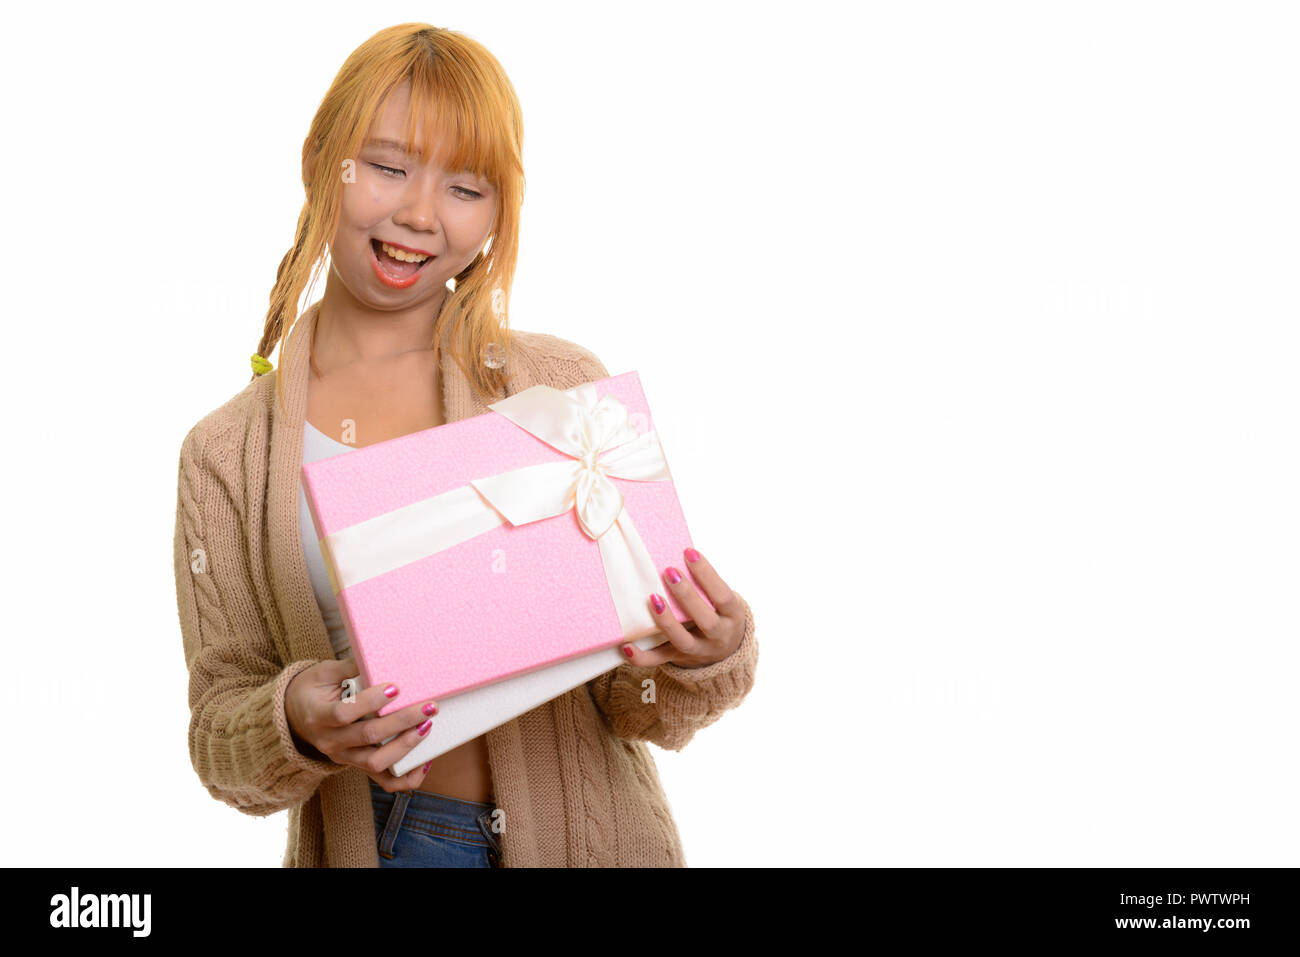 Young happy Asian woman smiling and opening gift box Stock Photo